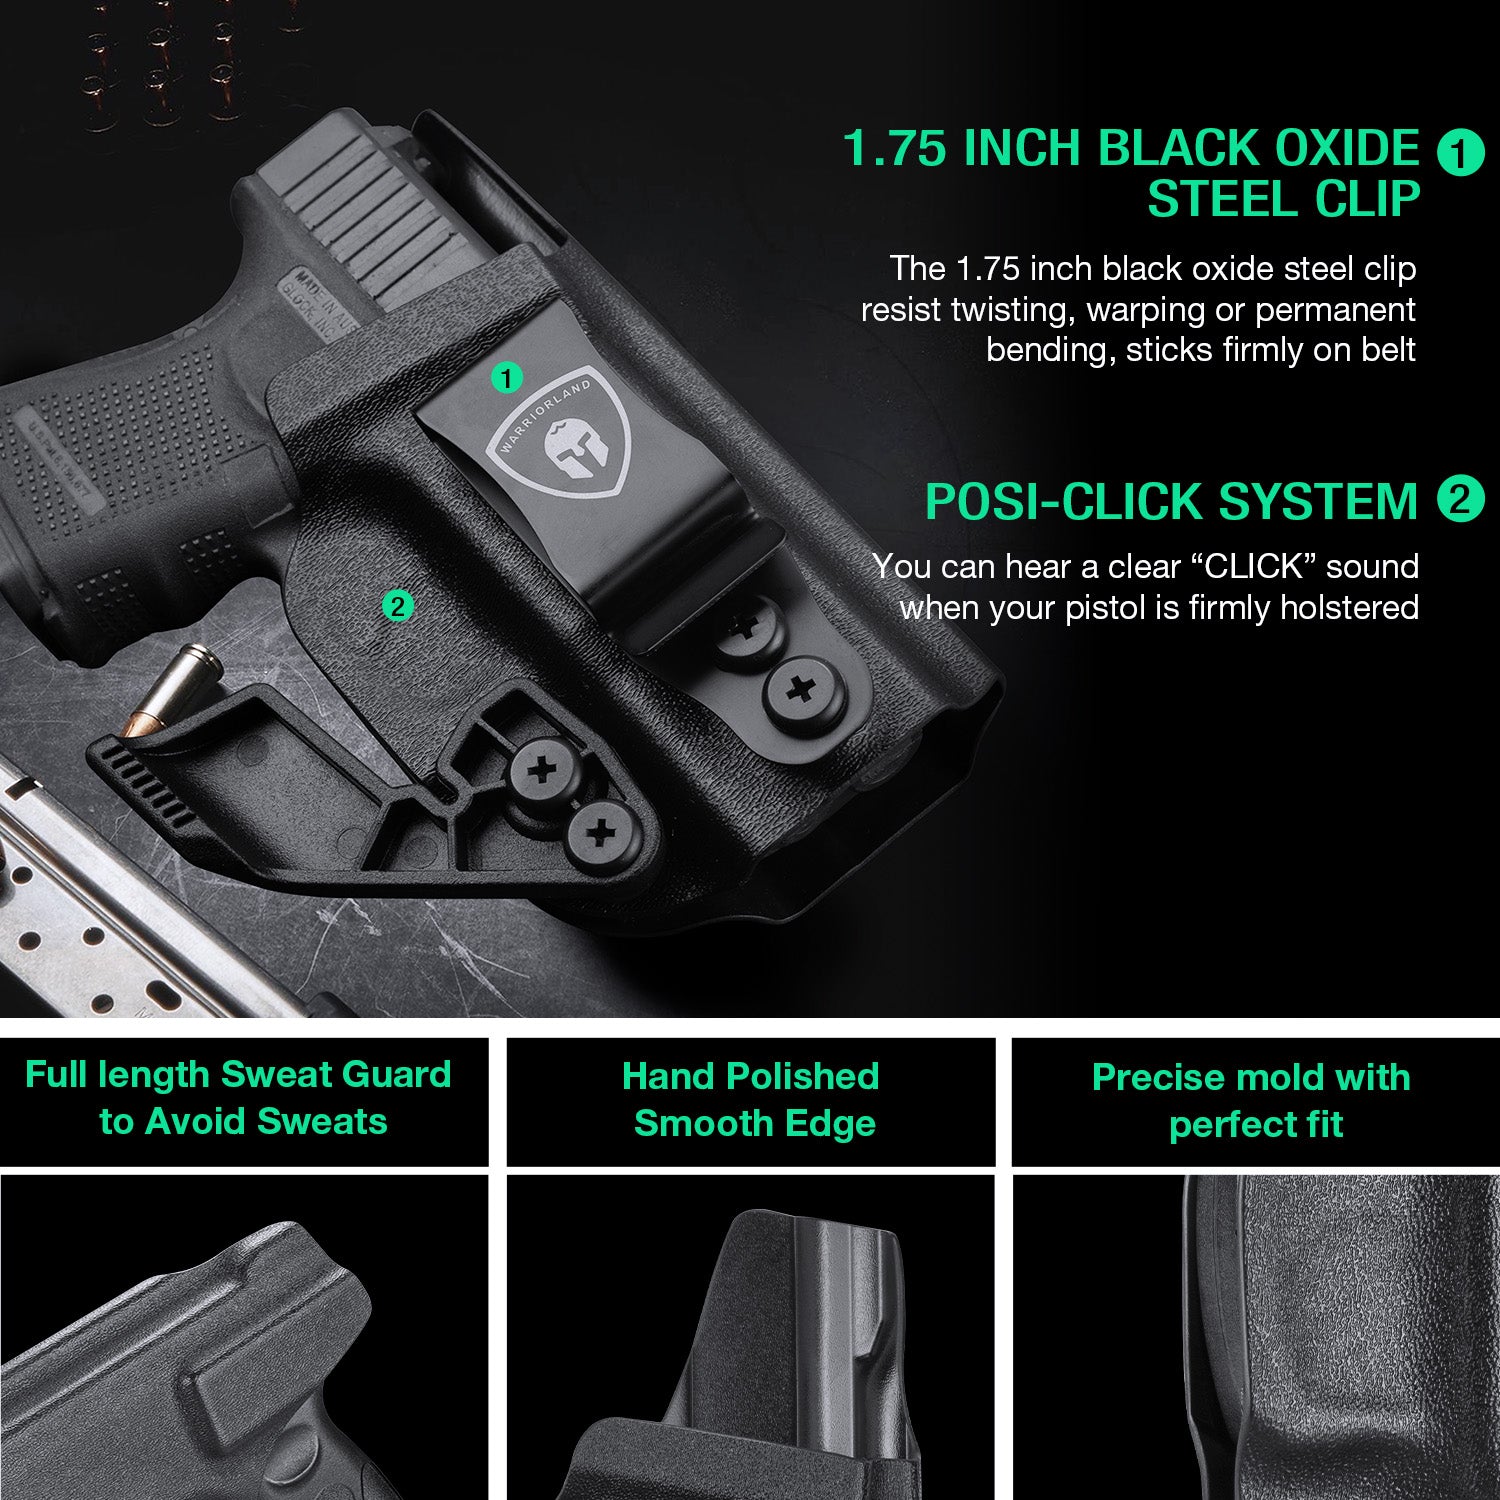 IWB Kydex Holster with Claw for Glock 26, Optic Ready Holster, Metal Belt Clip, 0.06 inch Kydex | Right/Left Hand